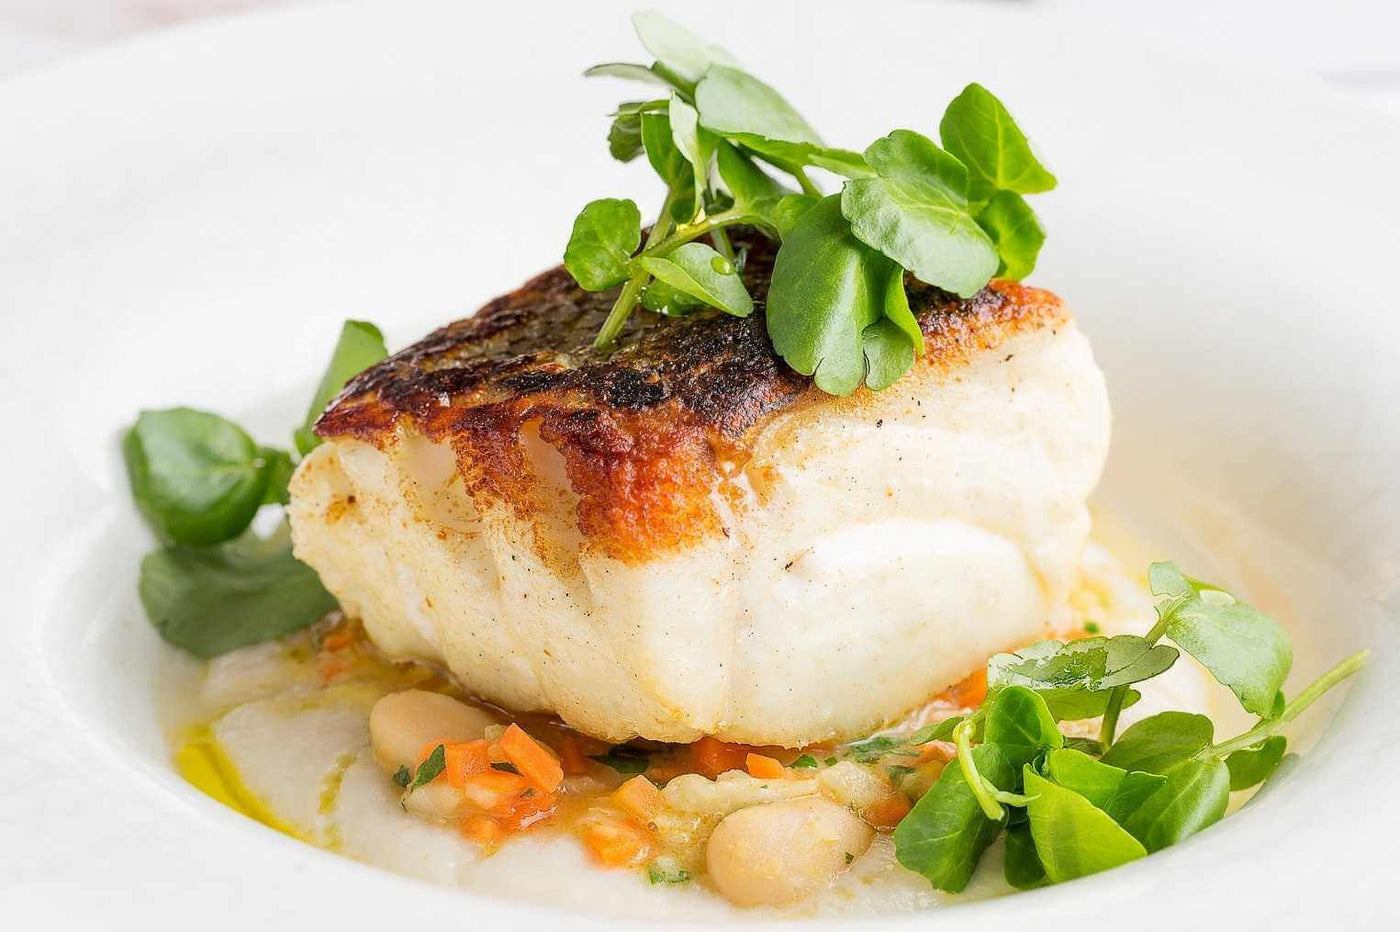 Kwee-Jack Fish Co. Wild Caught Cod Plated over beans topped with micro greens.